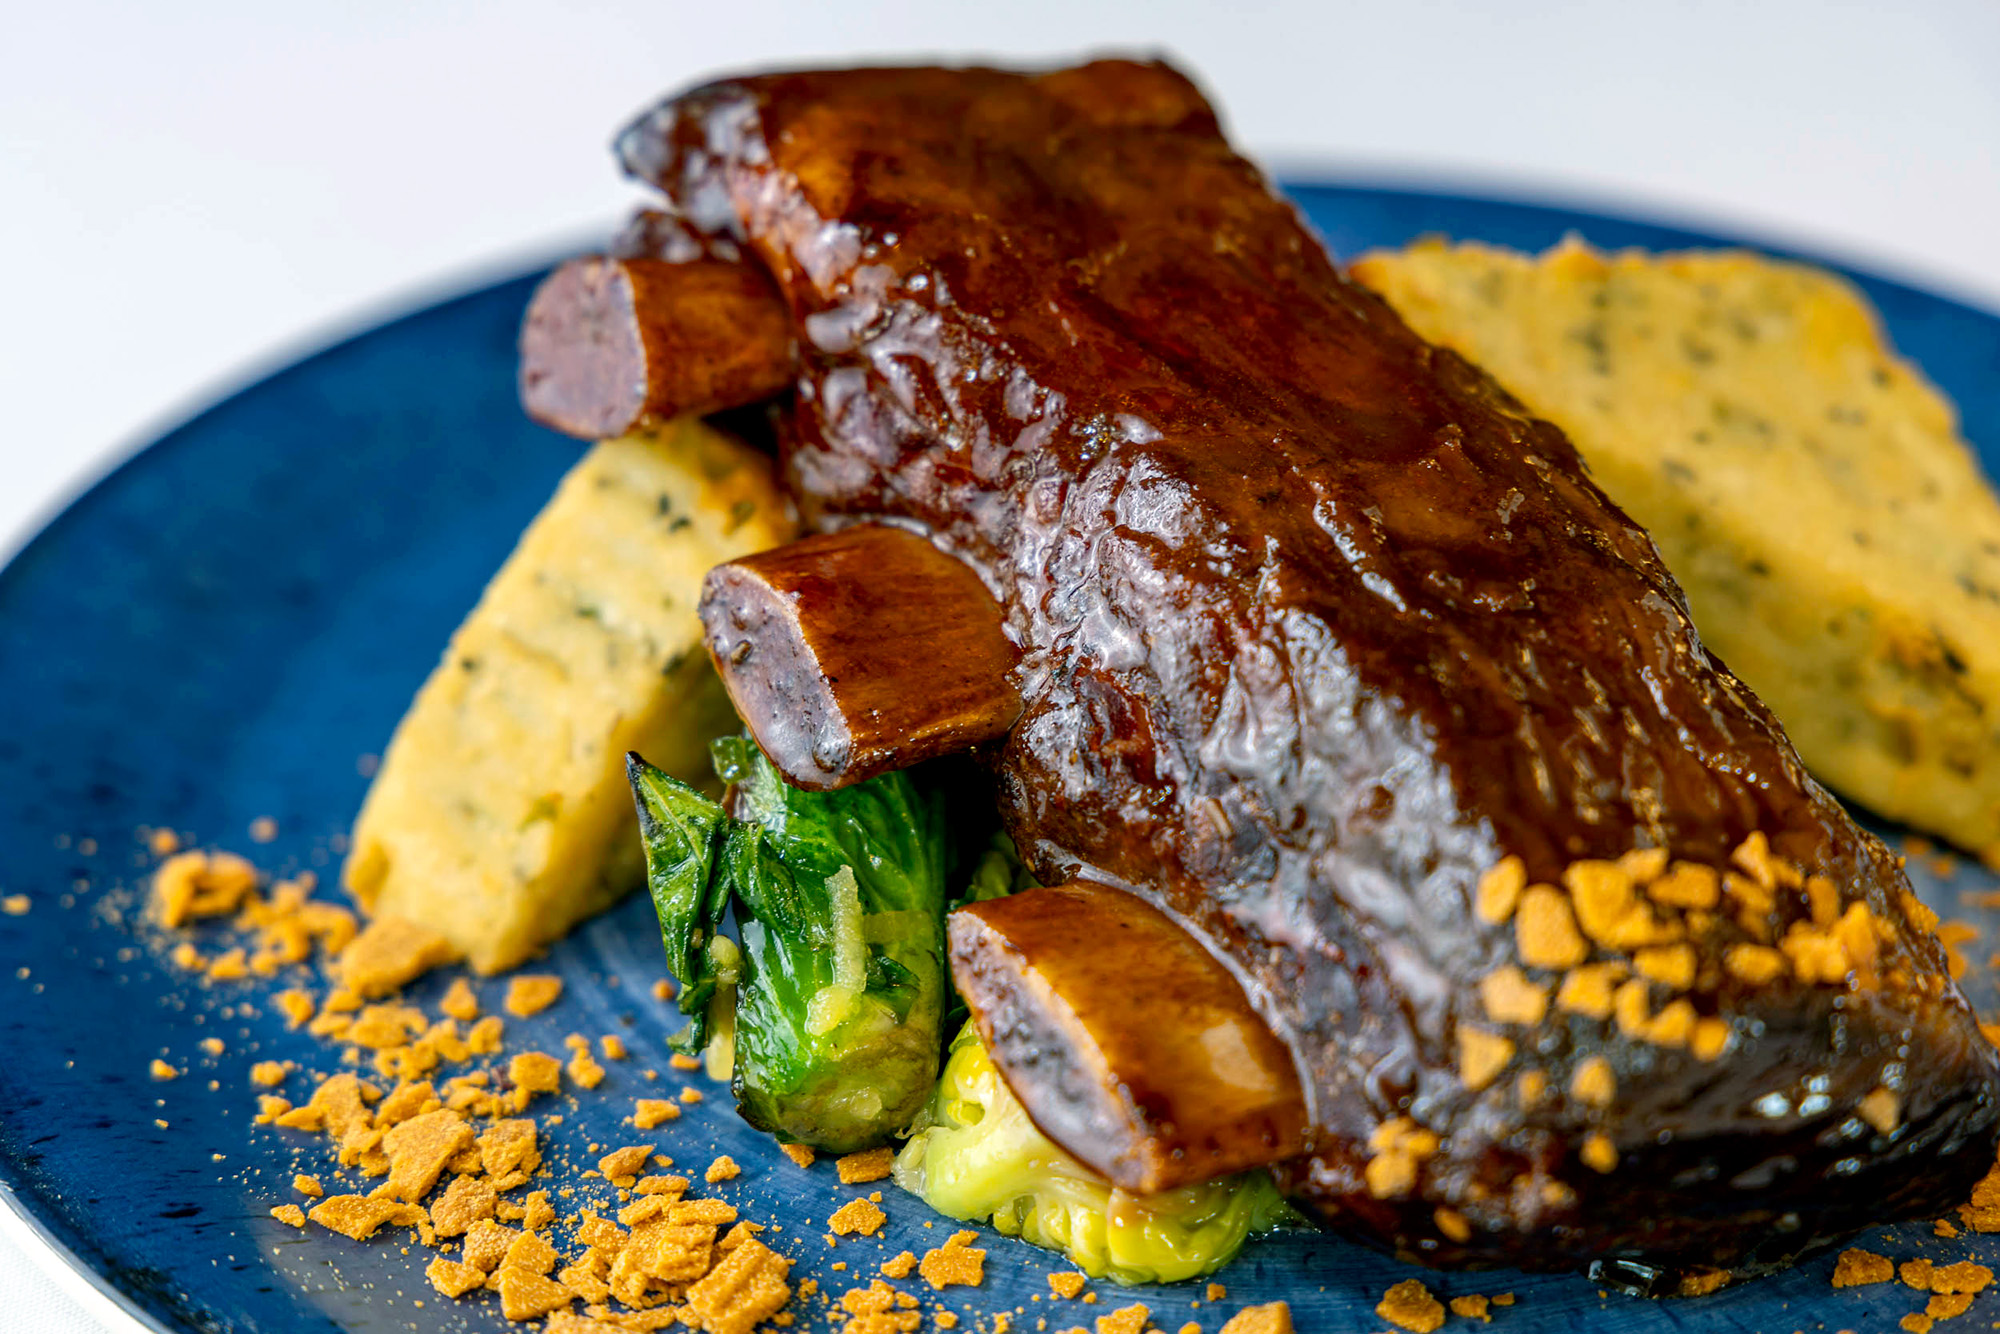 Braised Short Rib with a Panisse